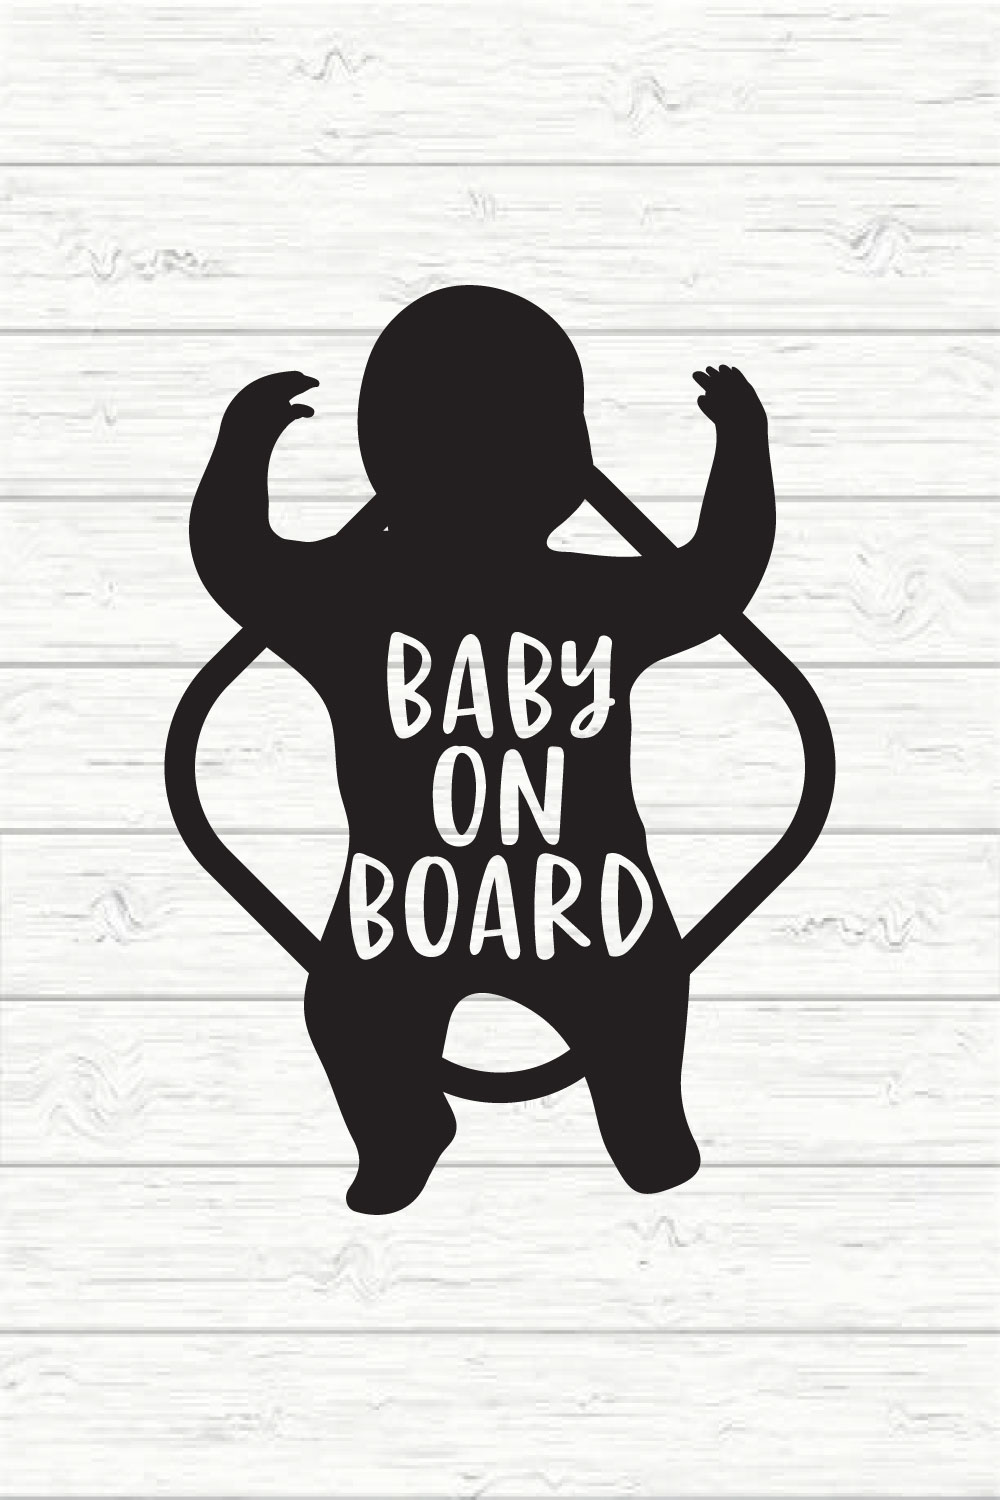 Baby on Board pinterest preview image.